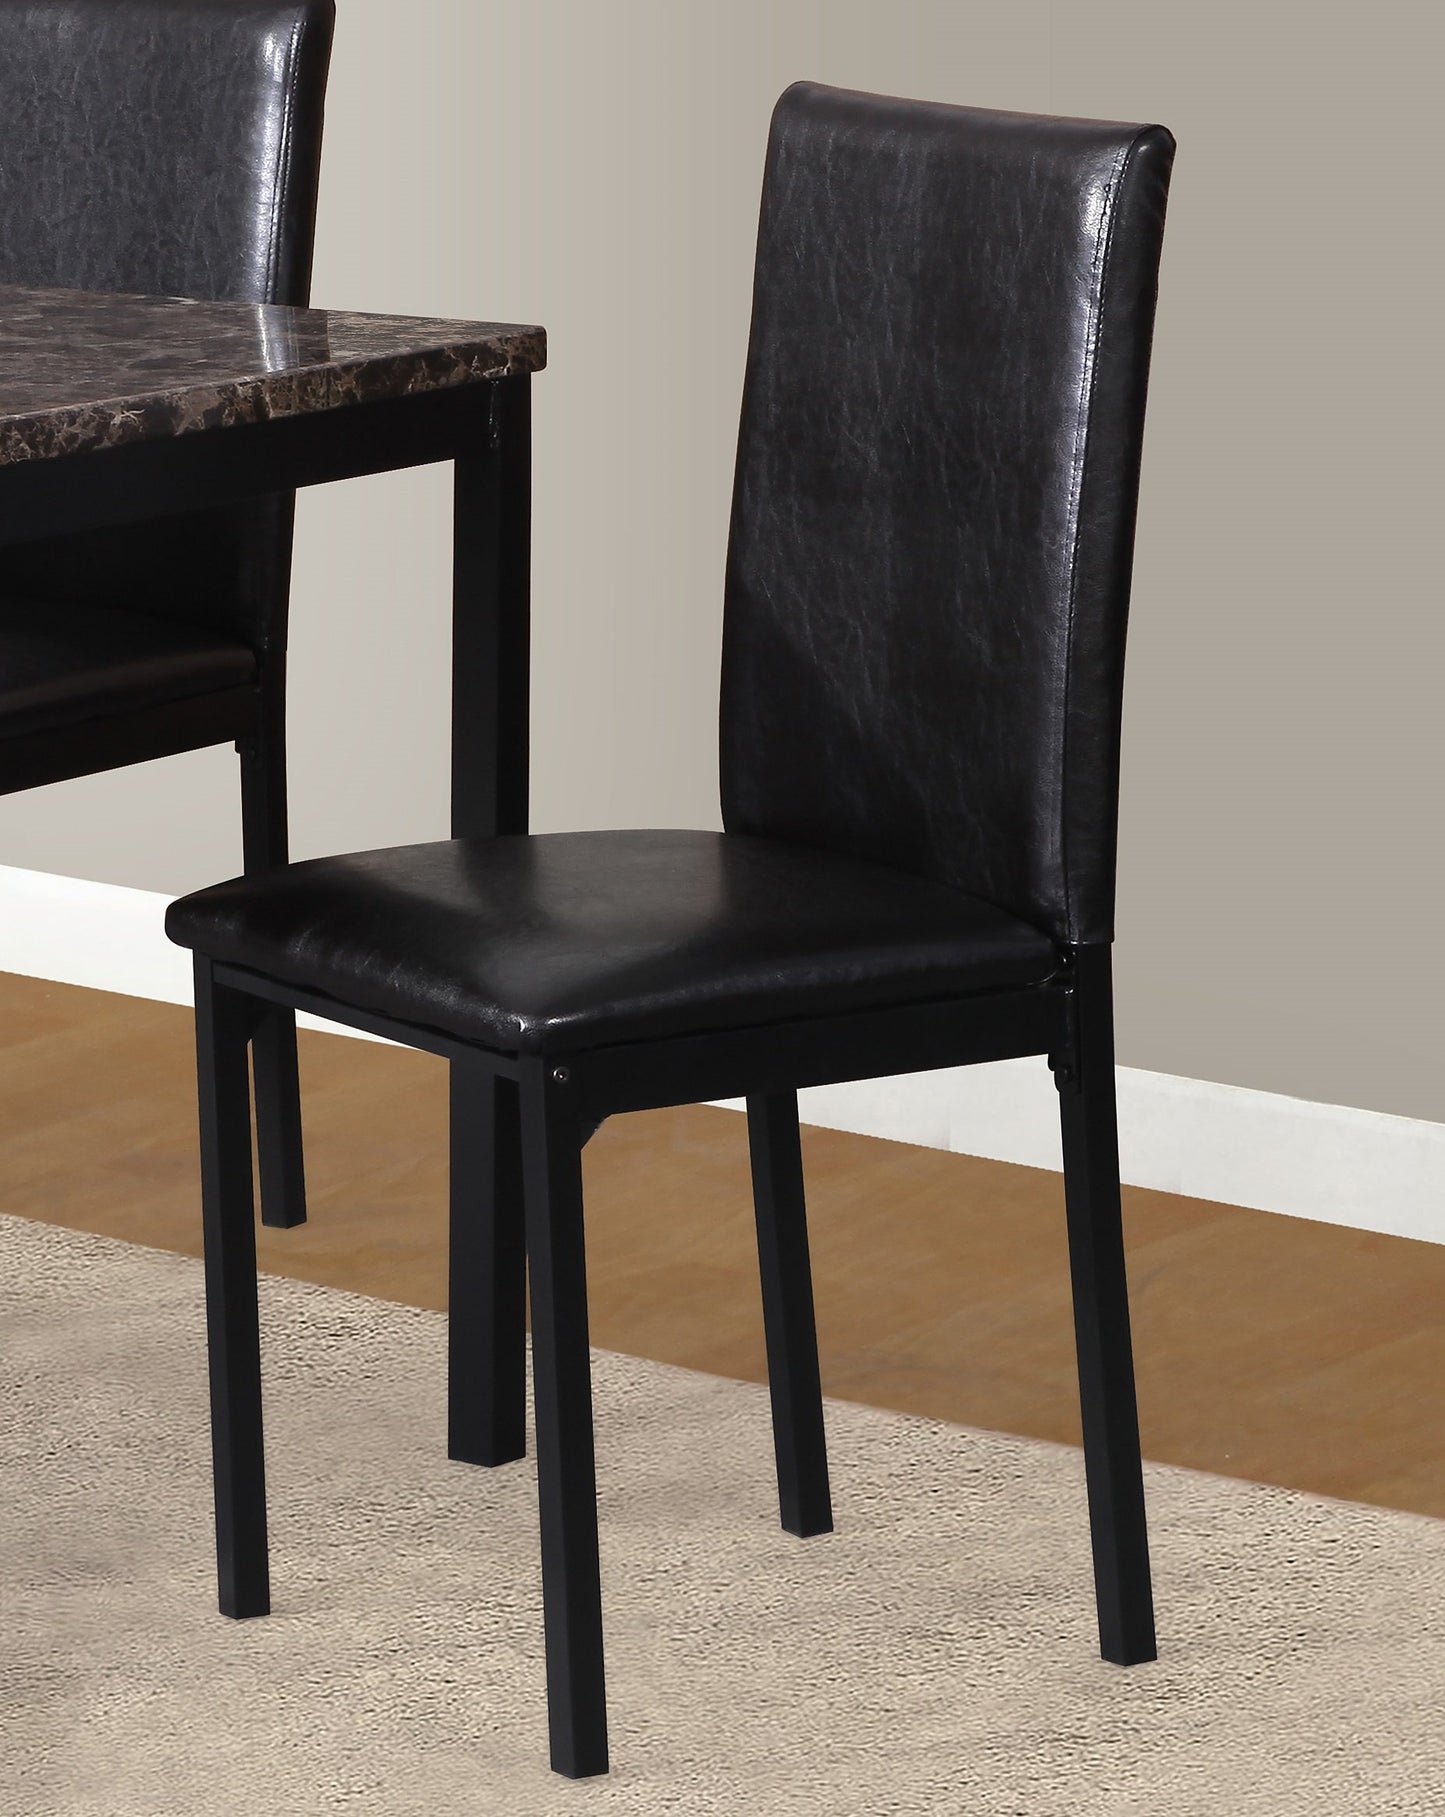 Citico 5-Piece Metal Dinette Set with Laminated Faux Marble Top, Black